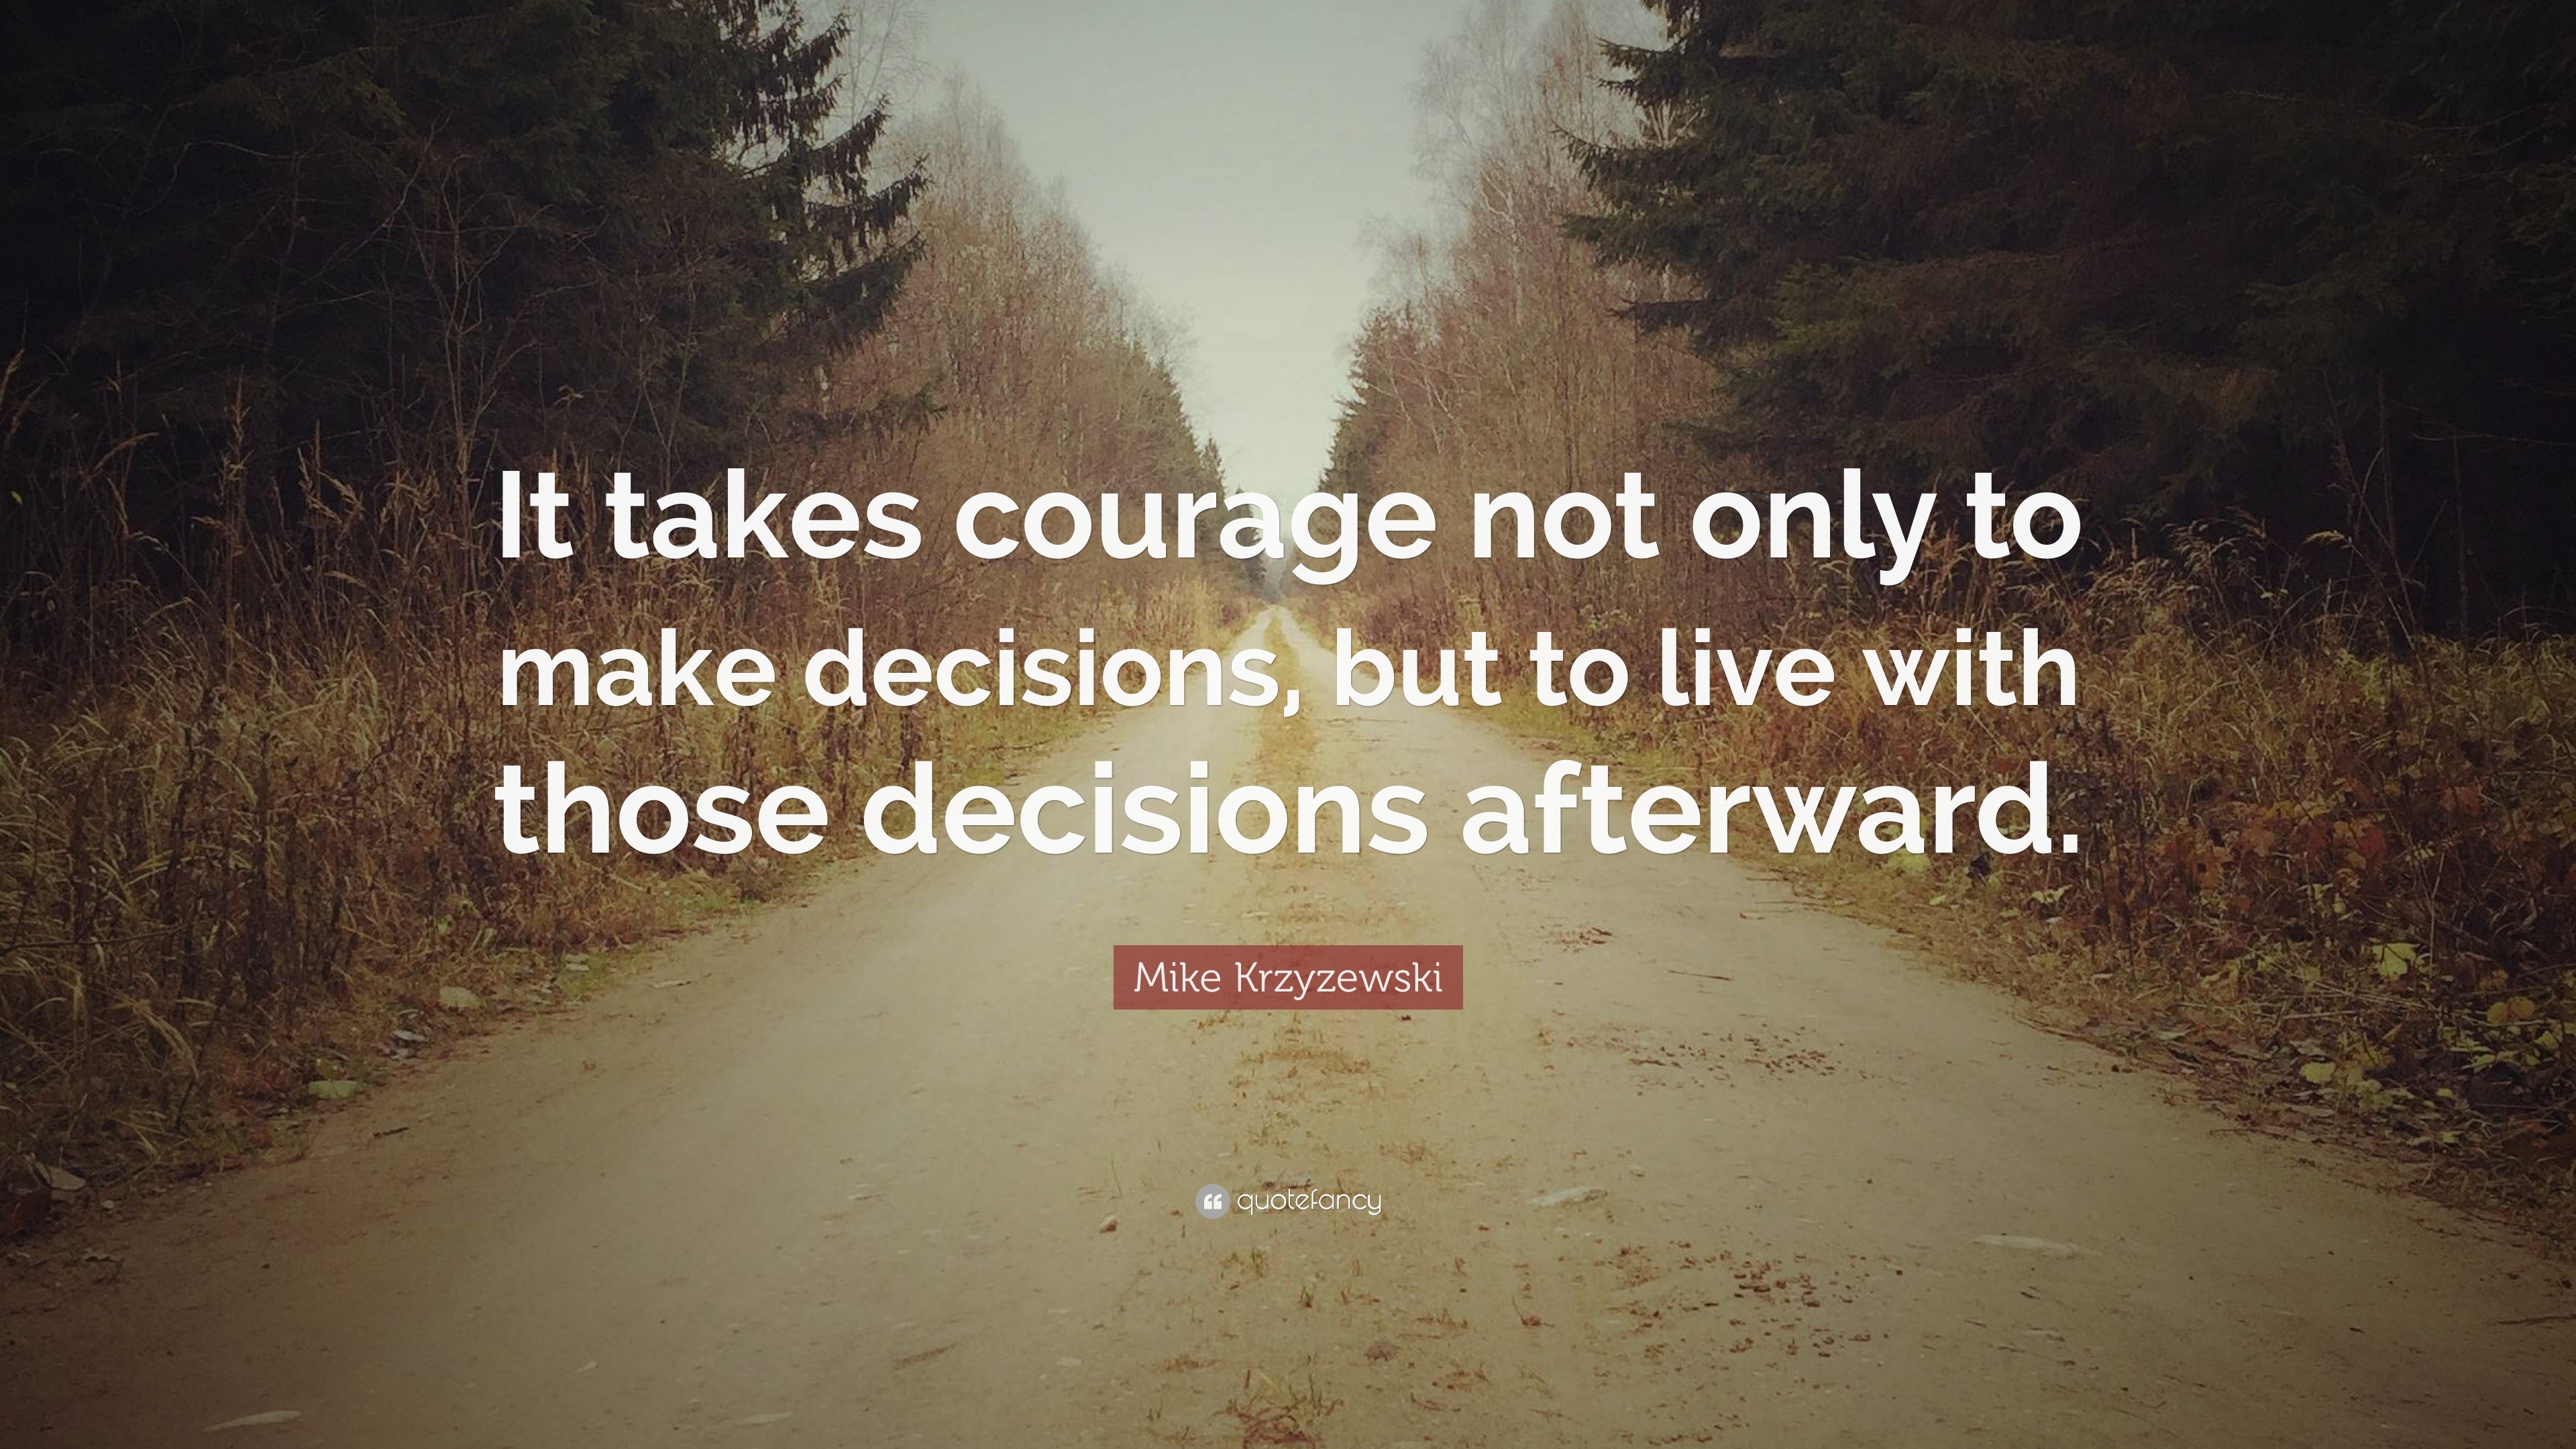 Mike Krzyzewski Quote: “It takes courage not only to make decisions ...